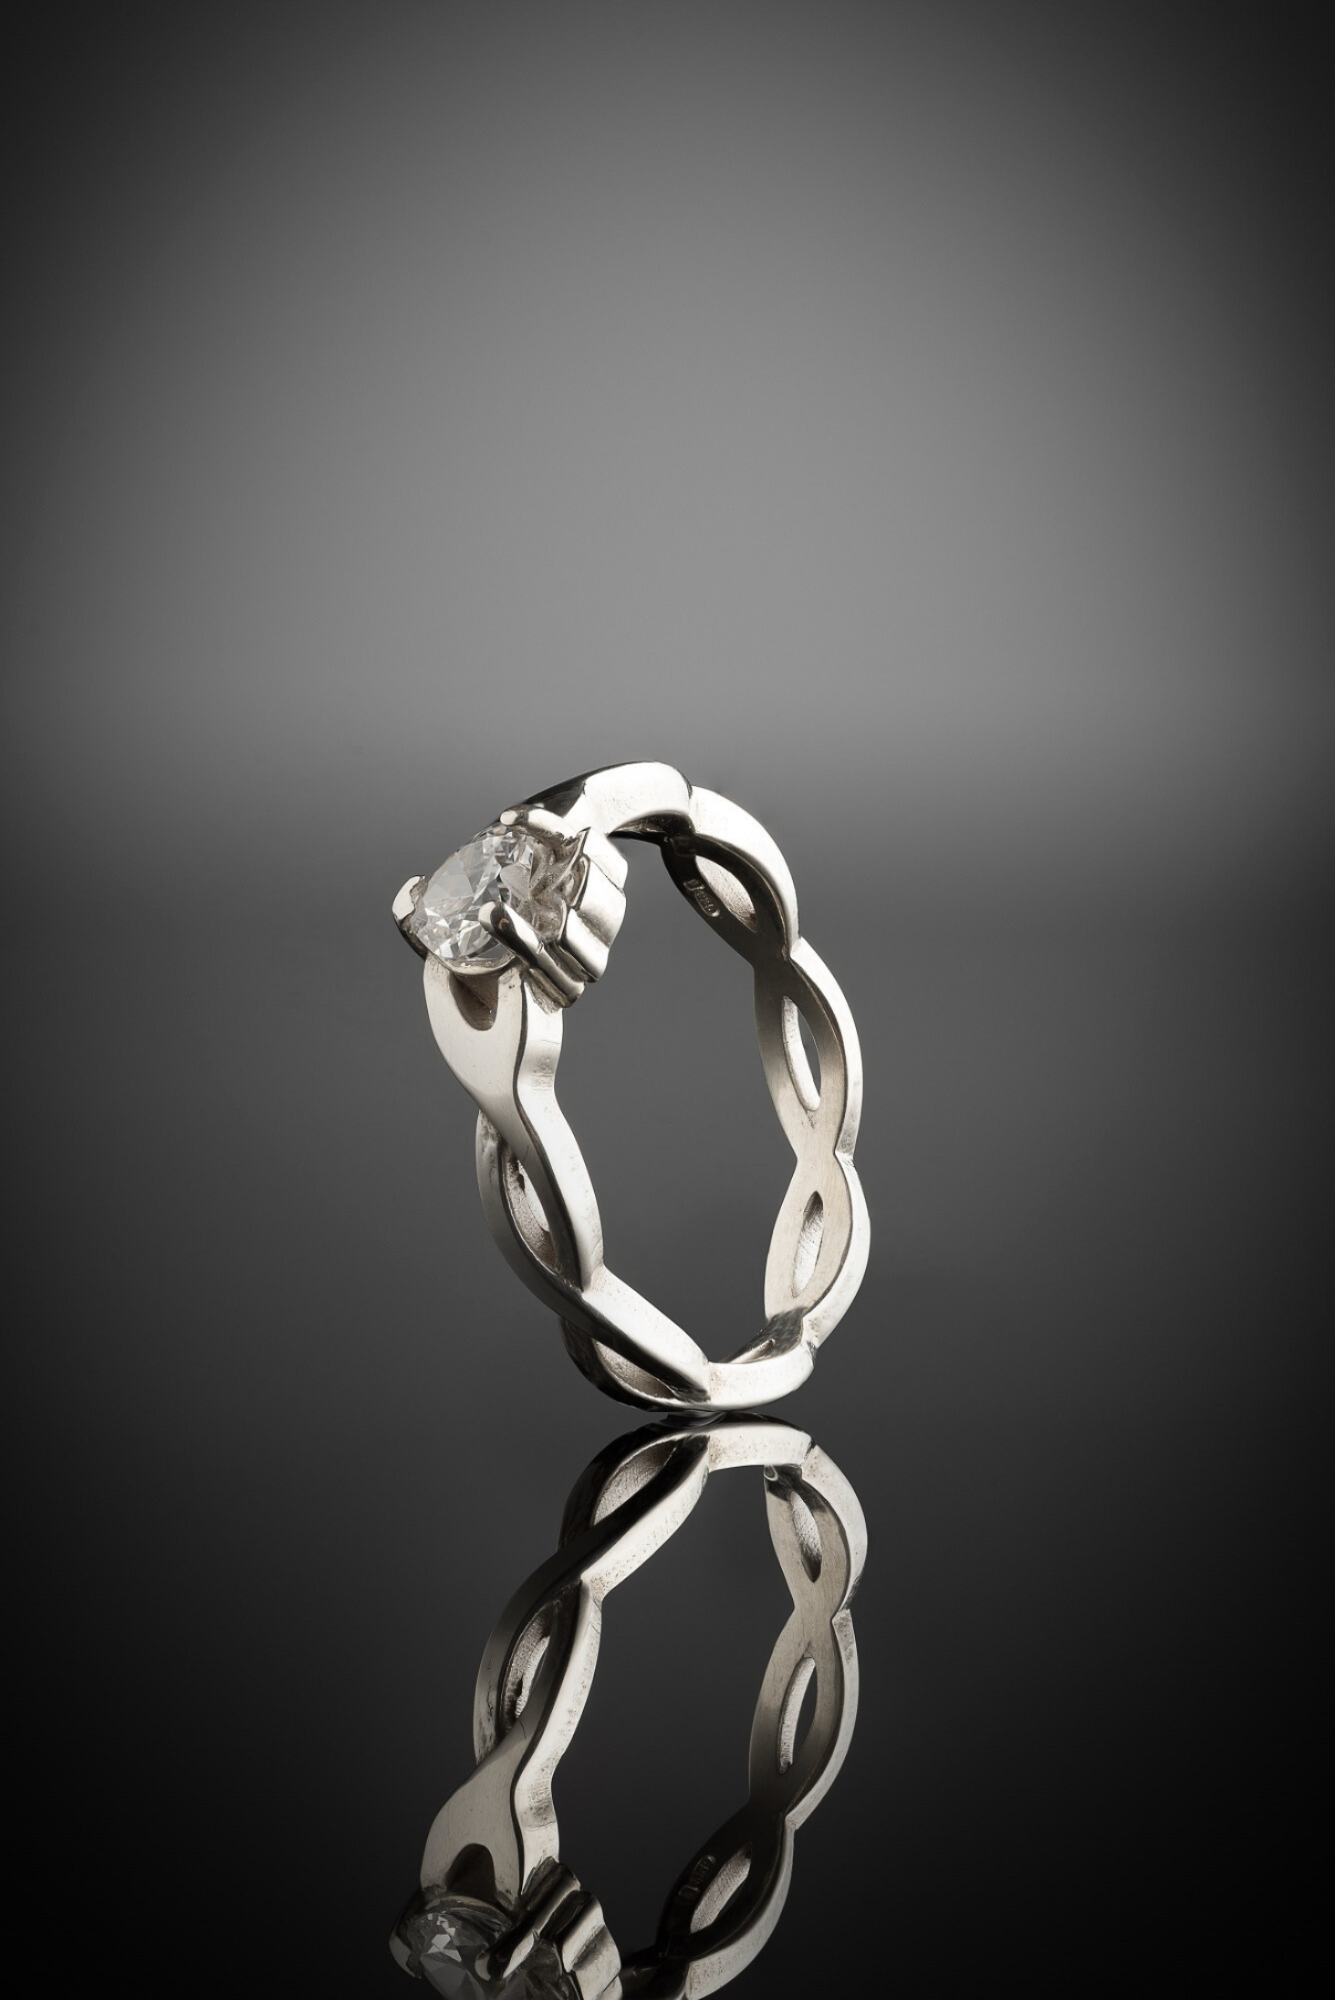 Diaomnd Claddagh ring weave band